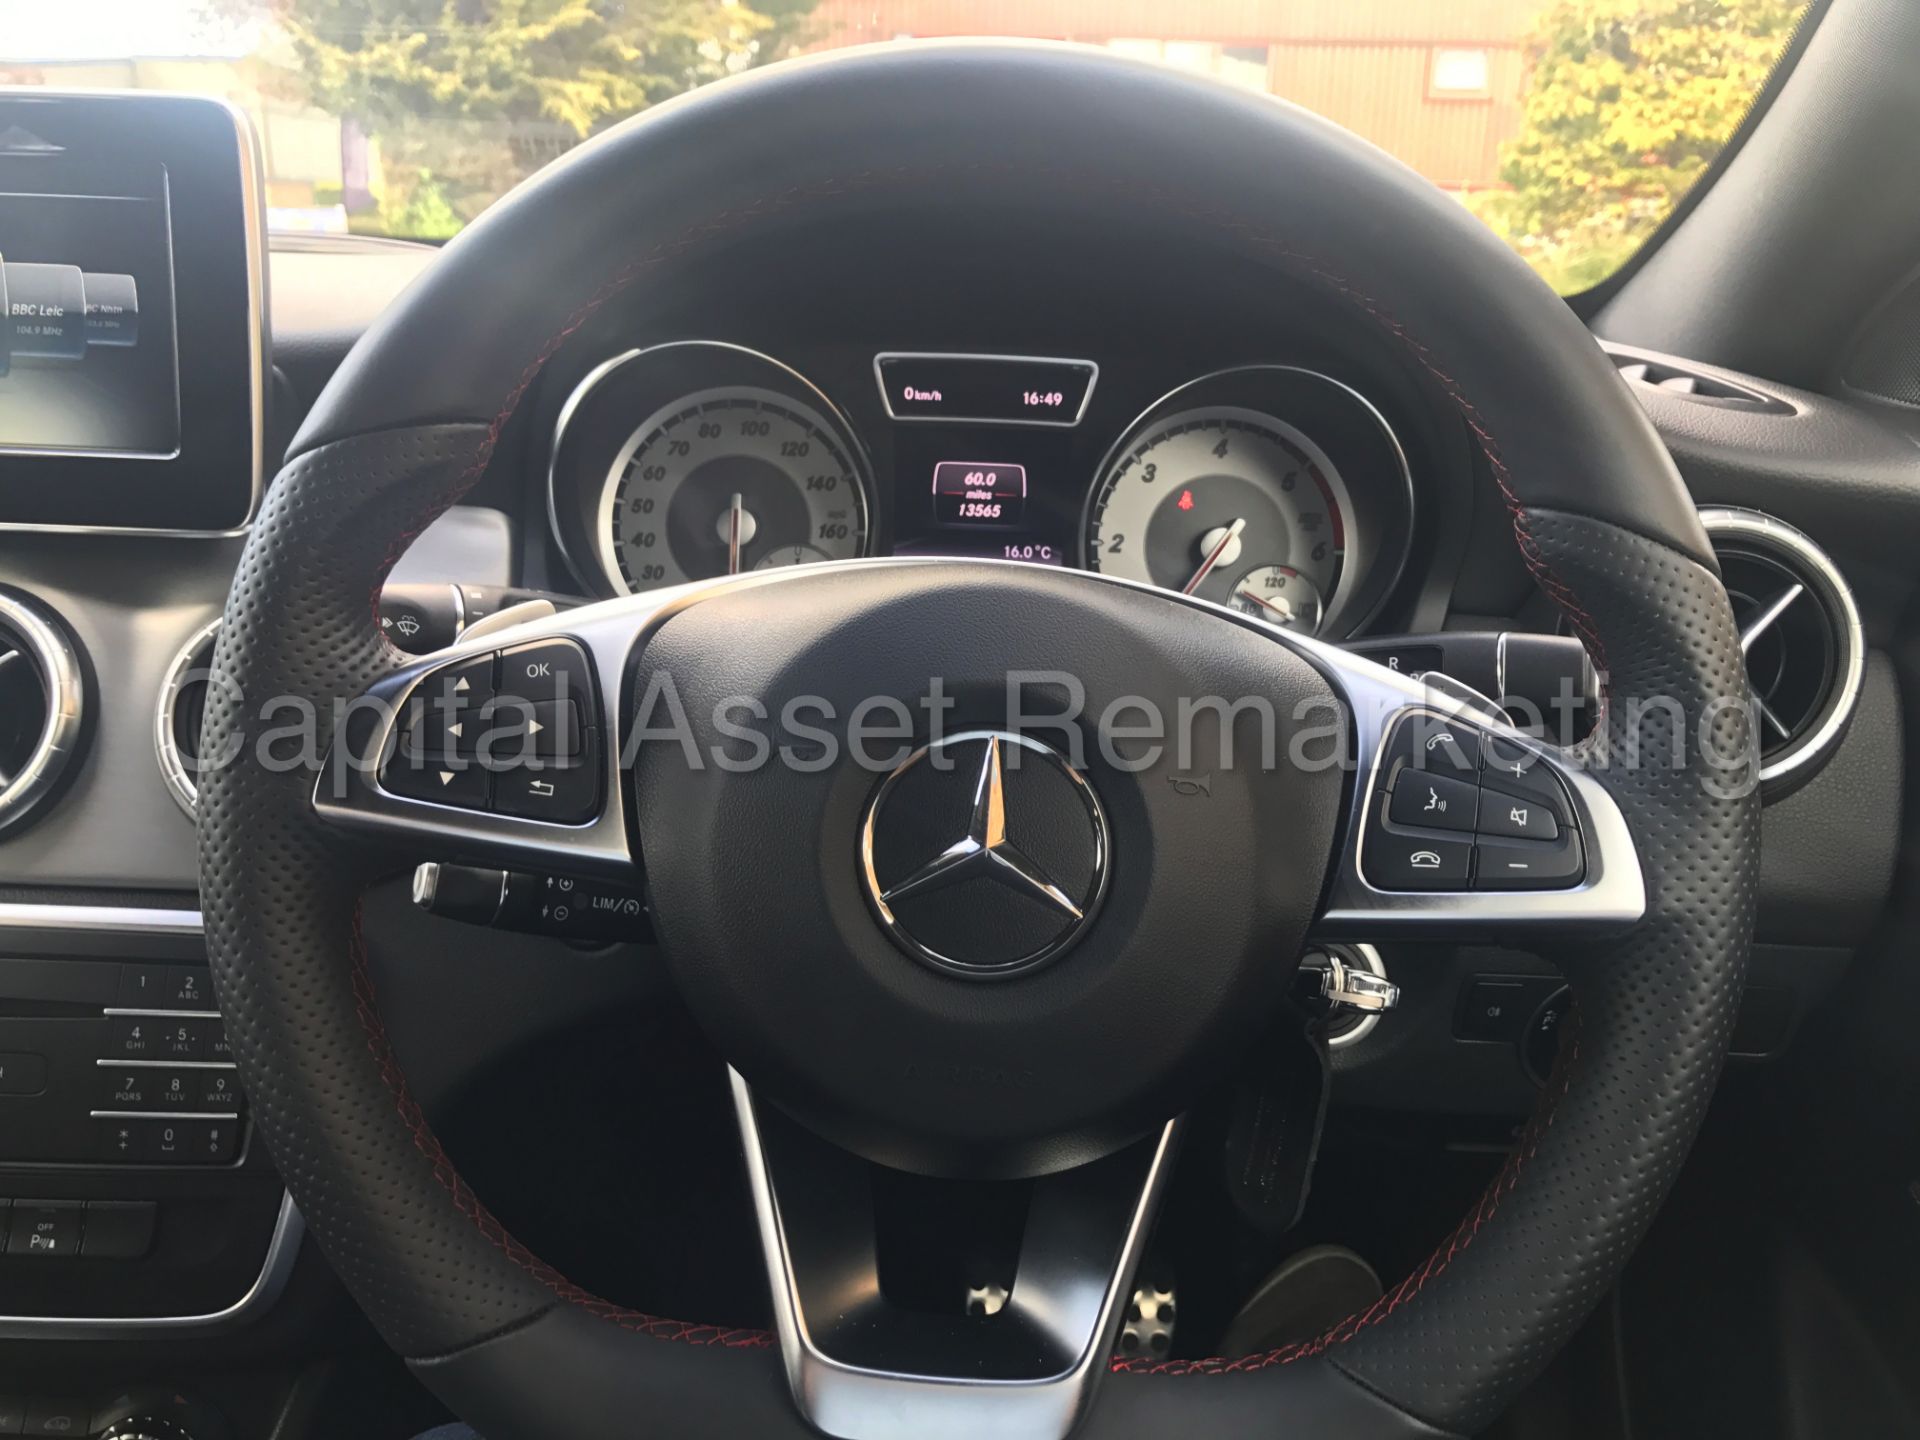 MERCEDES-BENZ CLA 220 CDI 'AMG SPORT' (2015) '7 DCT AUTO - STOP/START - SAT NAV' **NIGHT PACKAGE** - Image 31 of 33